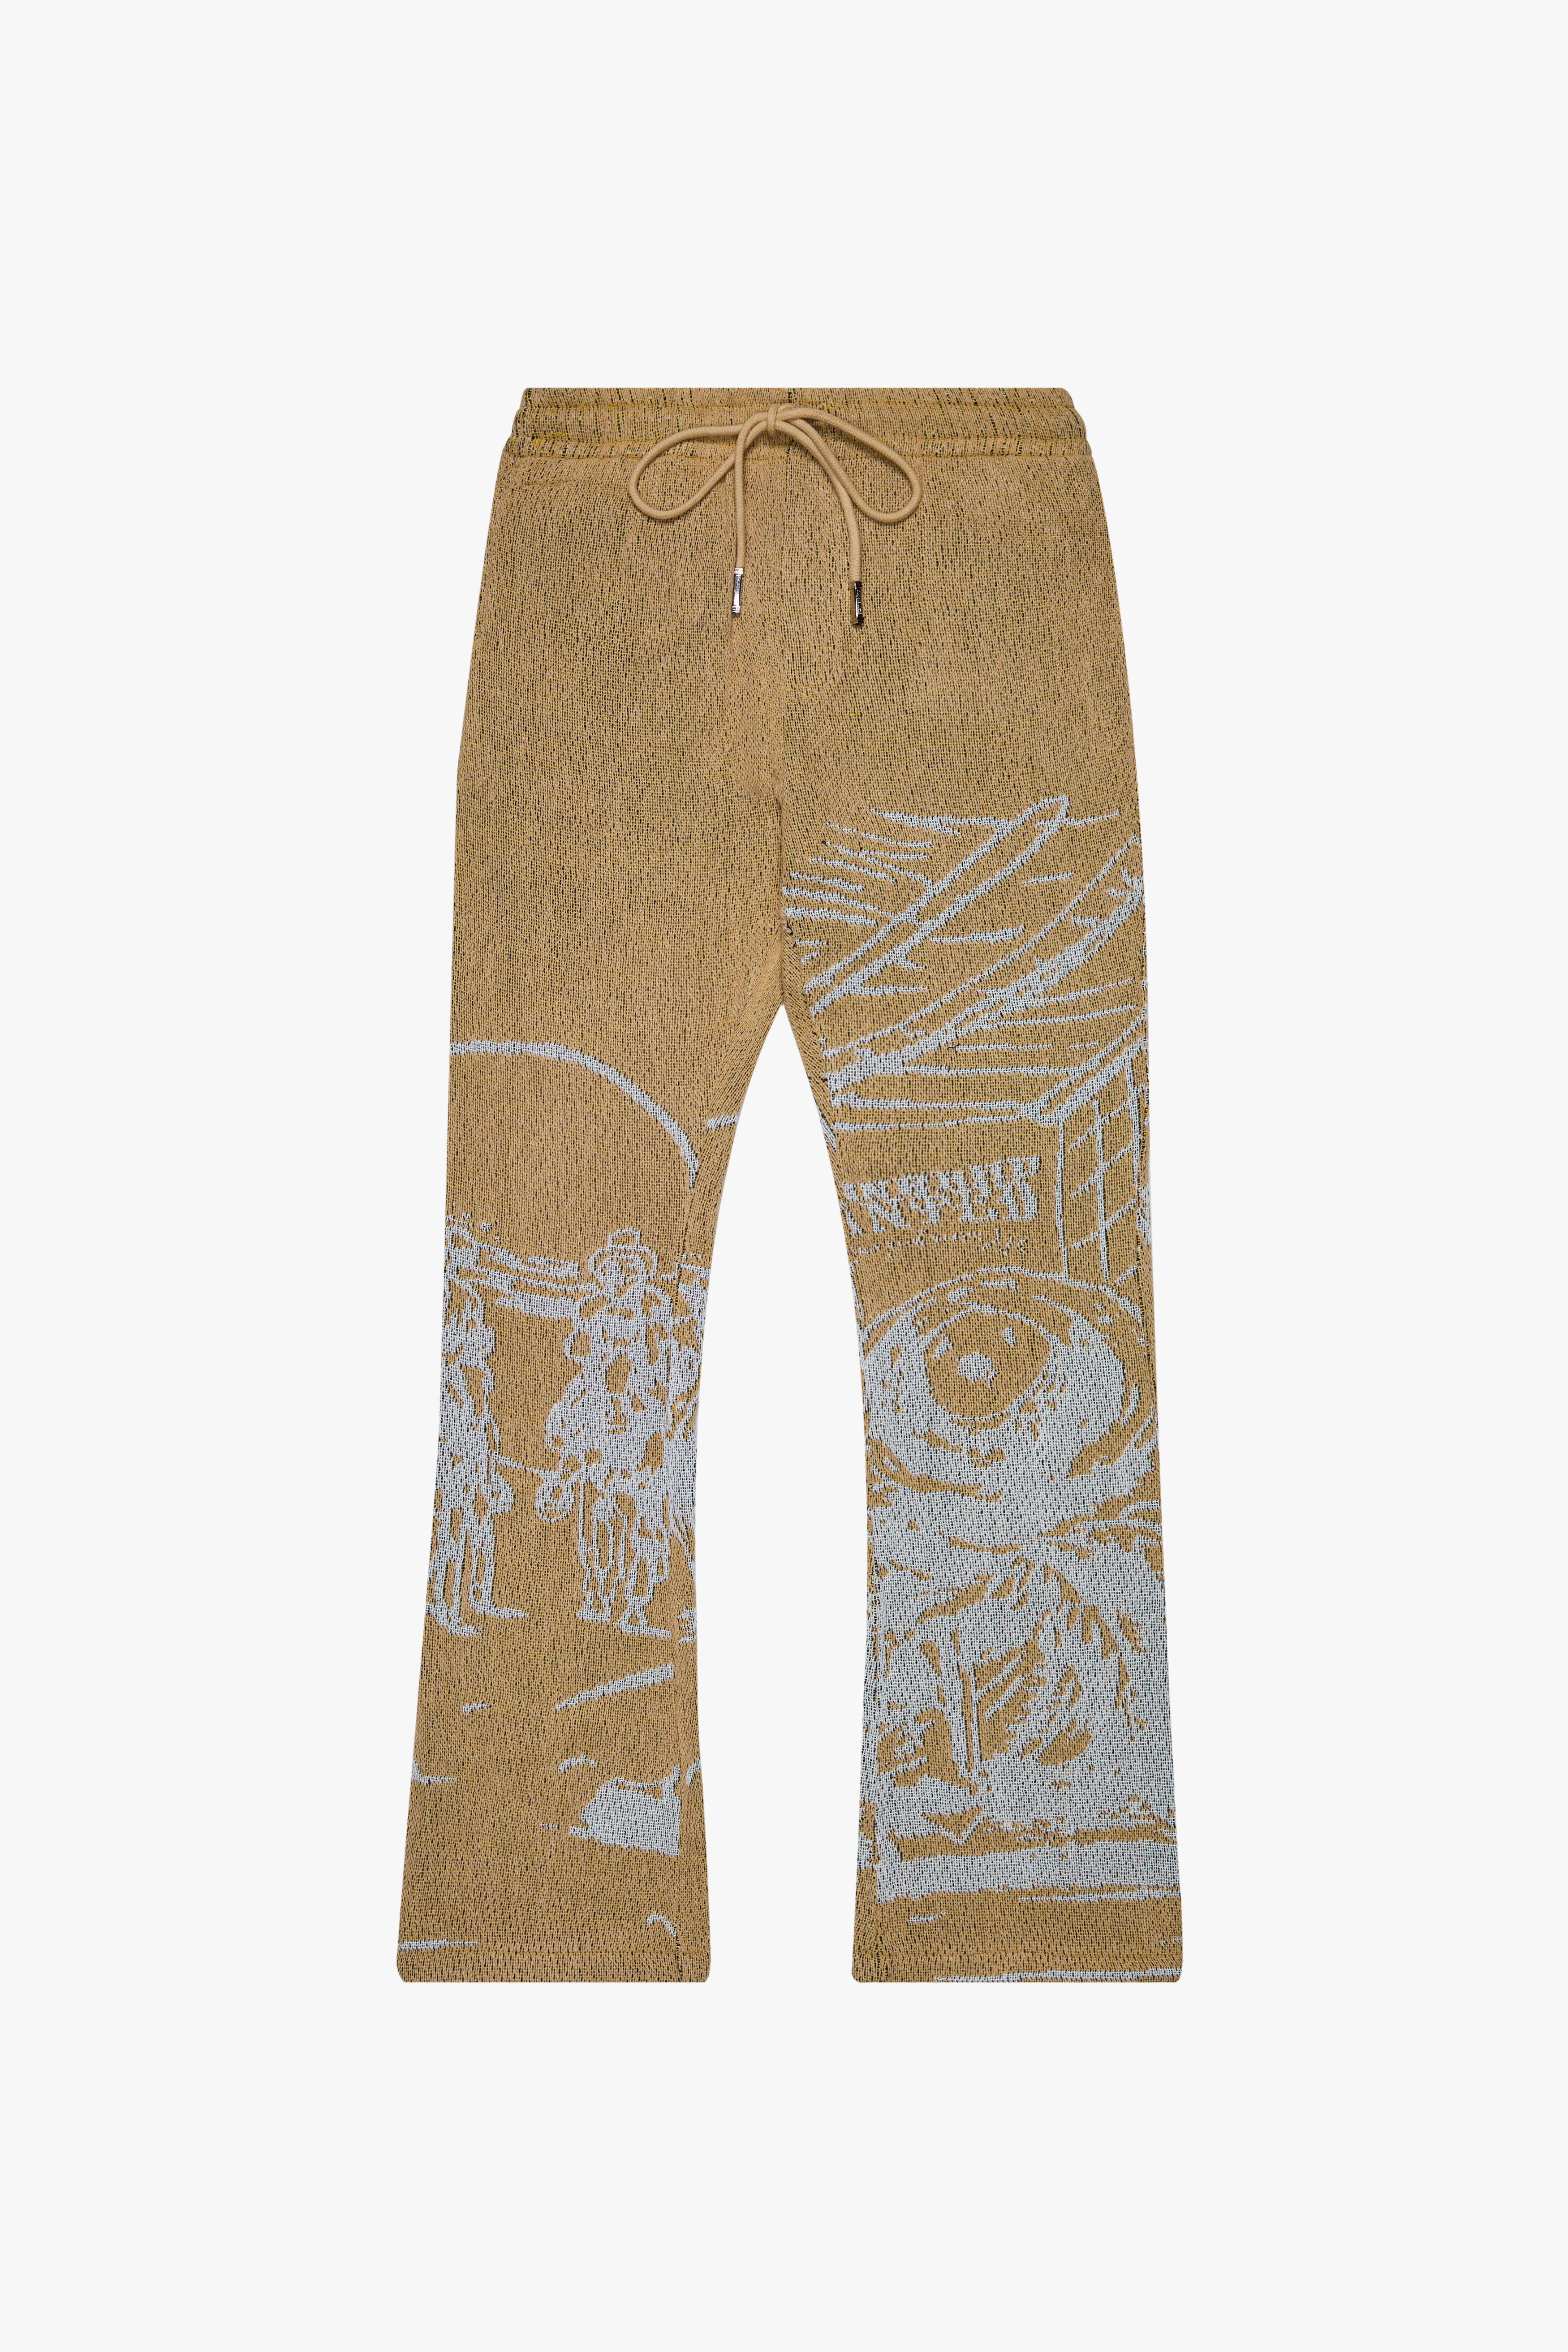 6thNBRHD TAPESTRY PANTS "QUICKDRAW" WHEAT